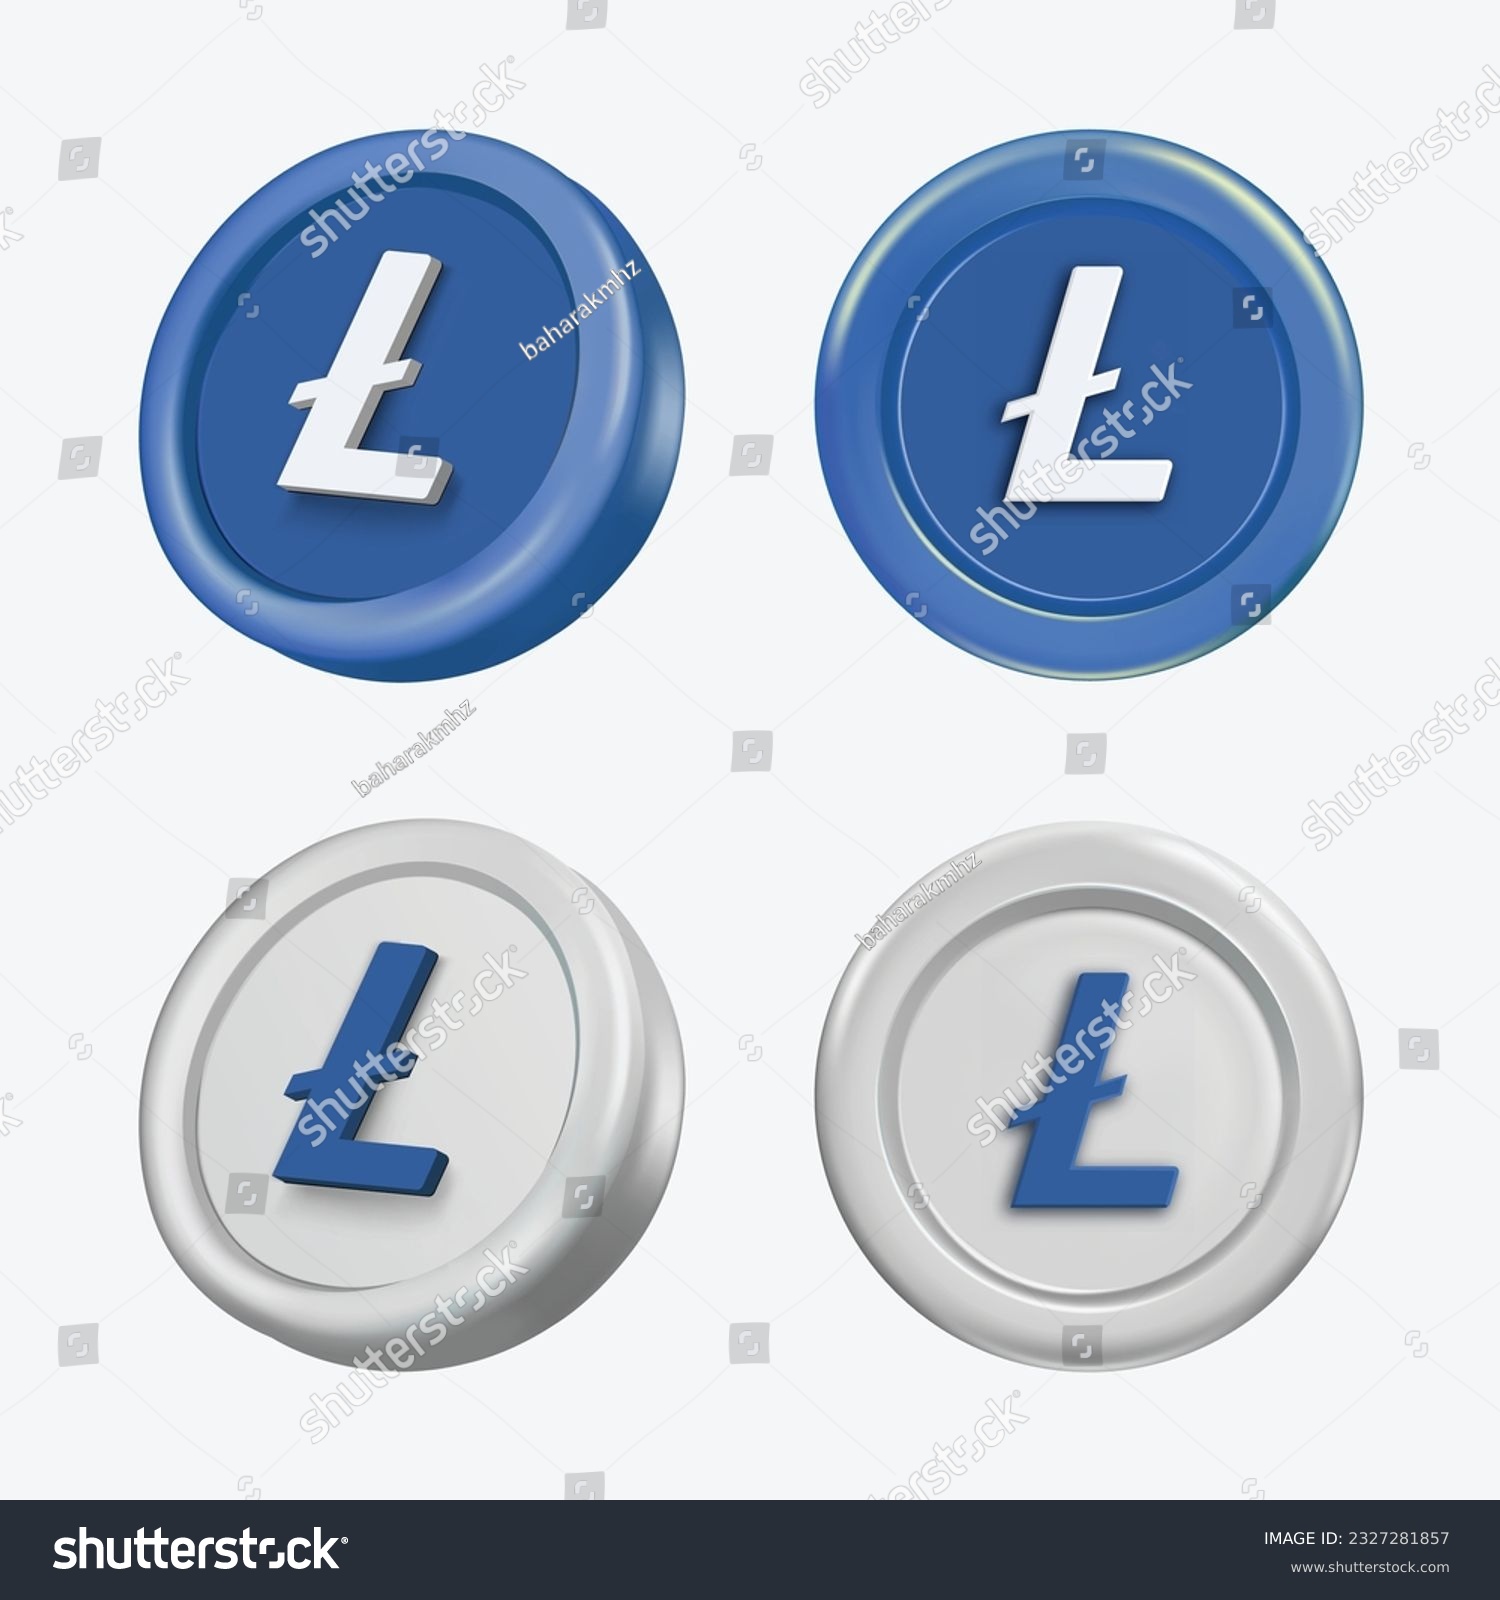 SVG of 3d Litecoin Cryptocurrency Coin (LTC) on white background. Vector illustration. blue svg